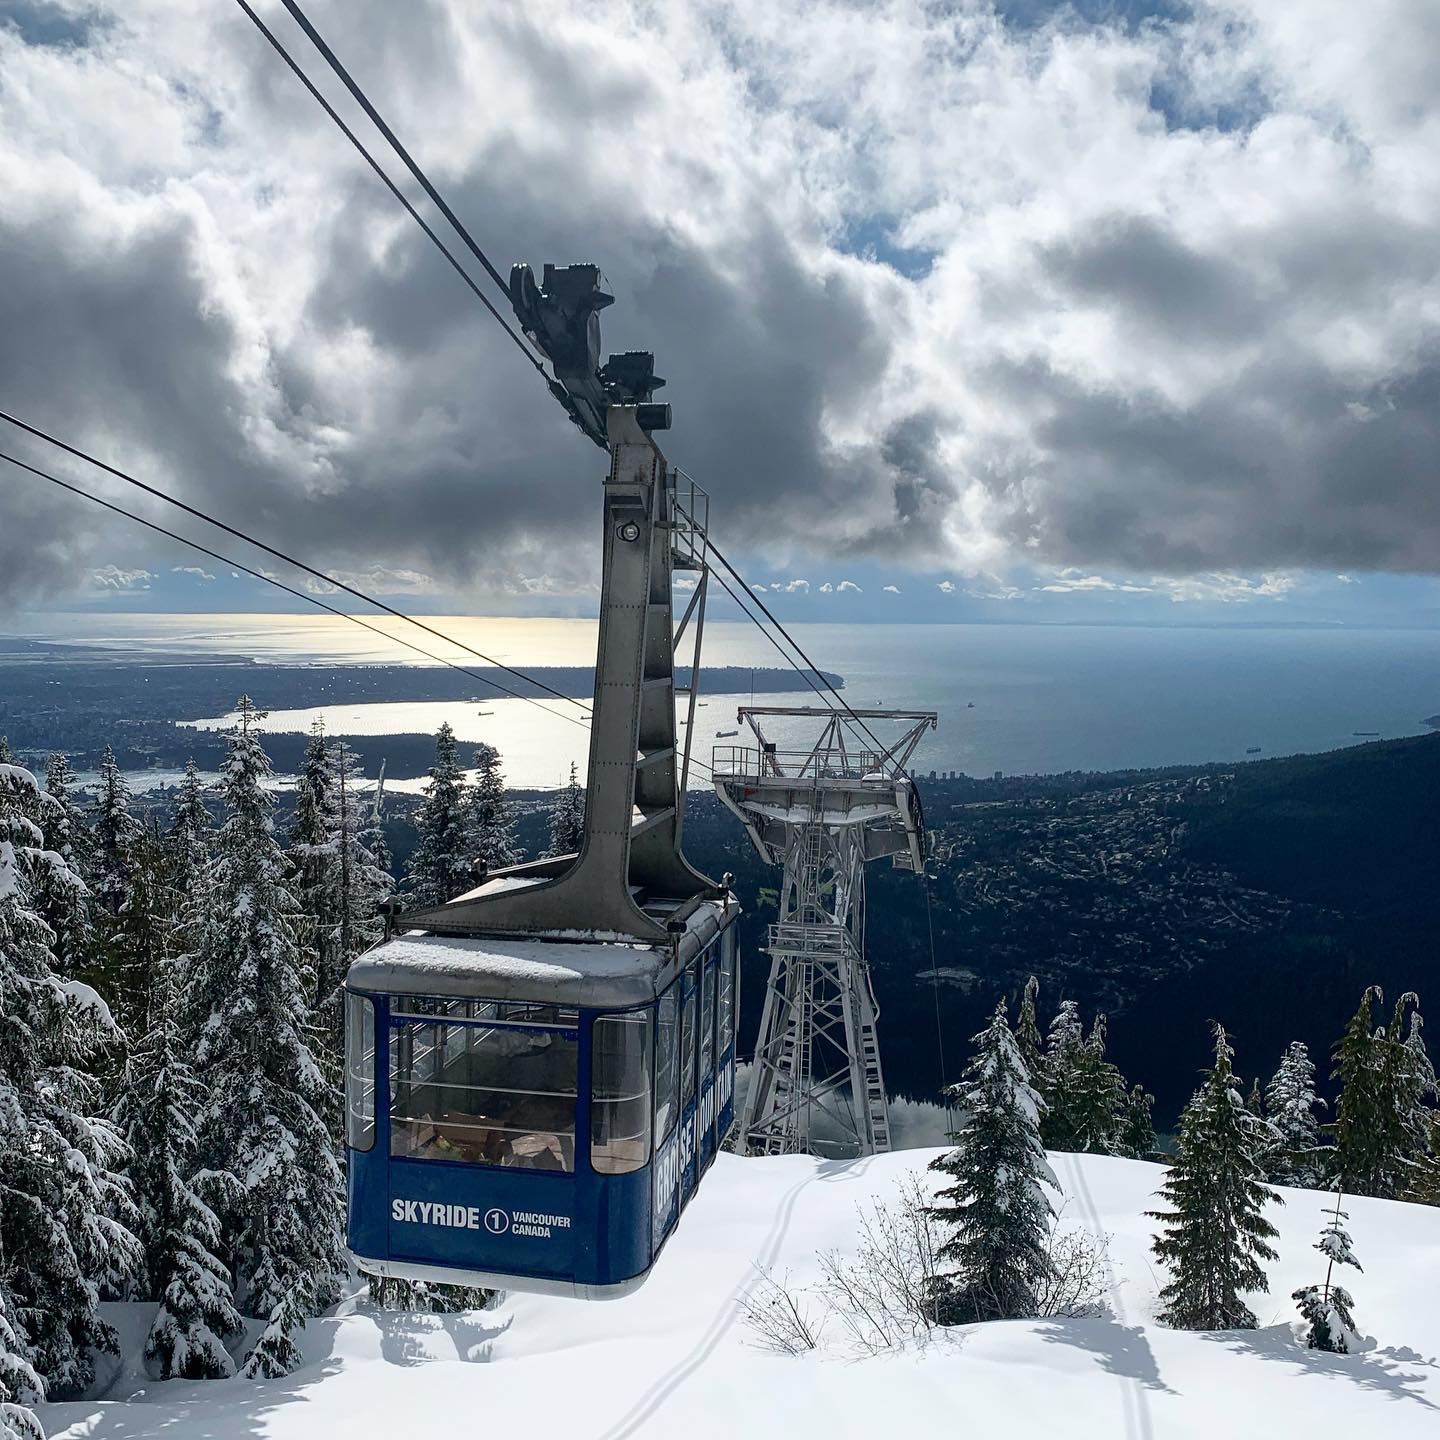 Grouse Mountain - the Peak of Vancouver, BC 4